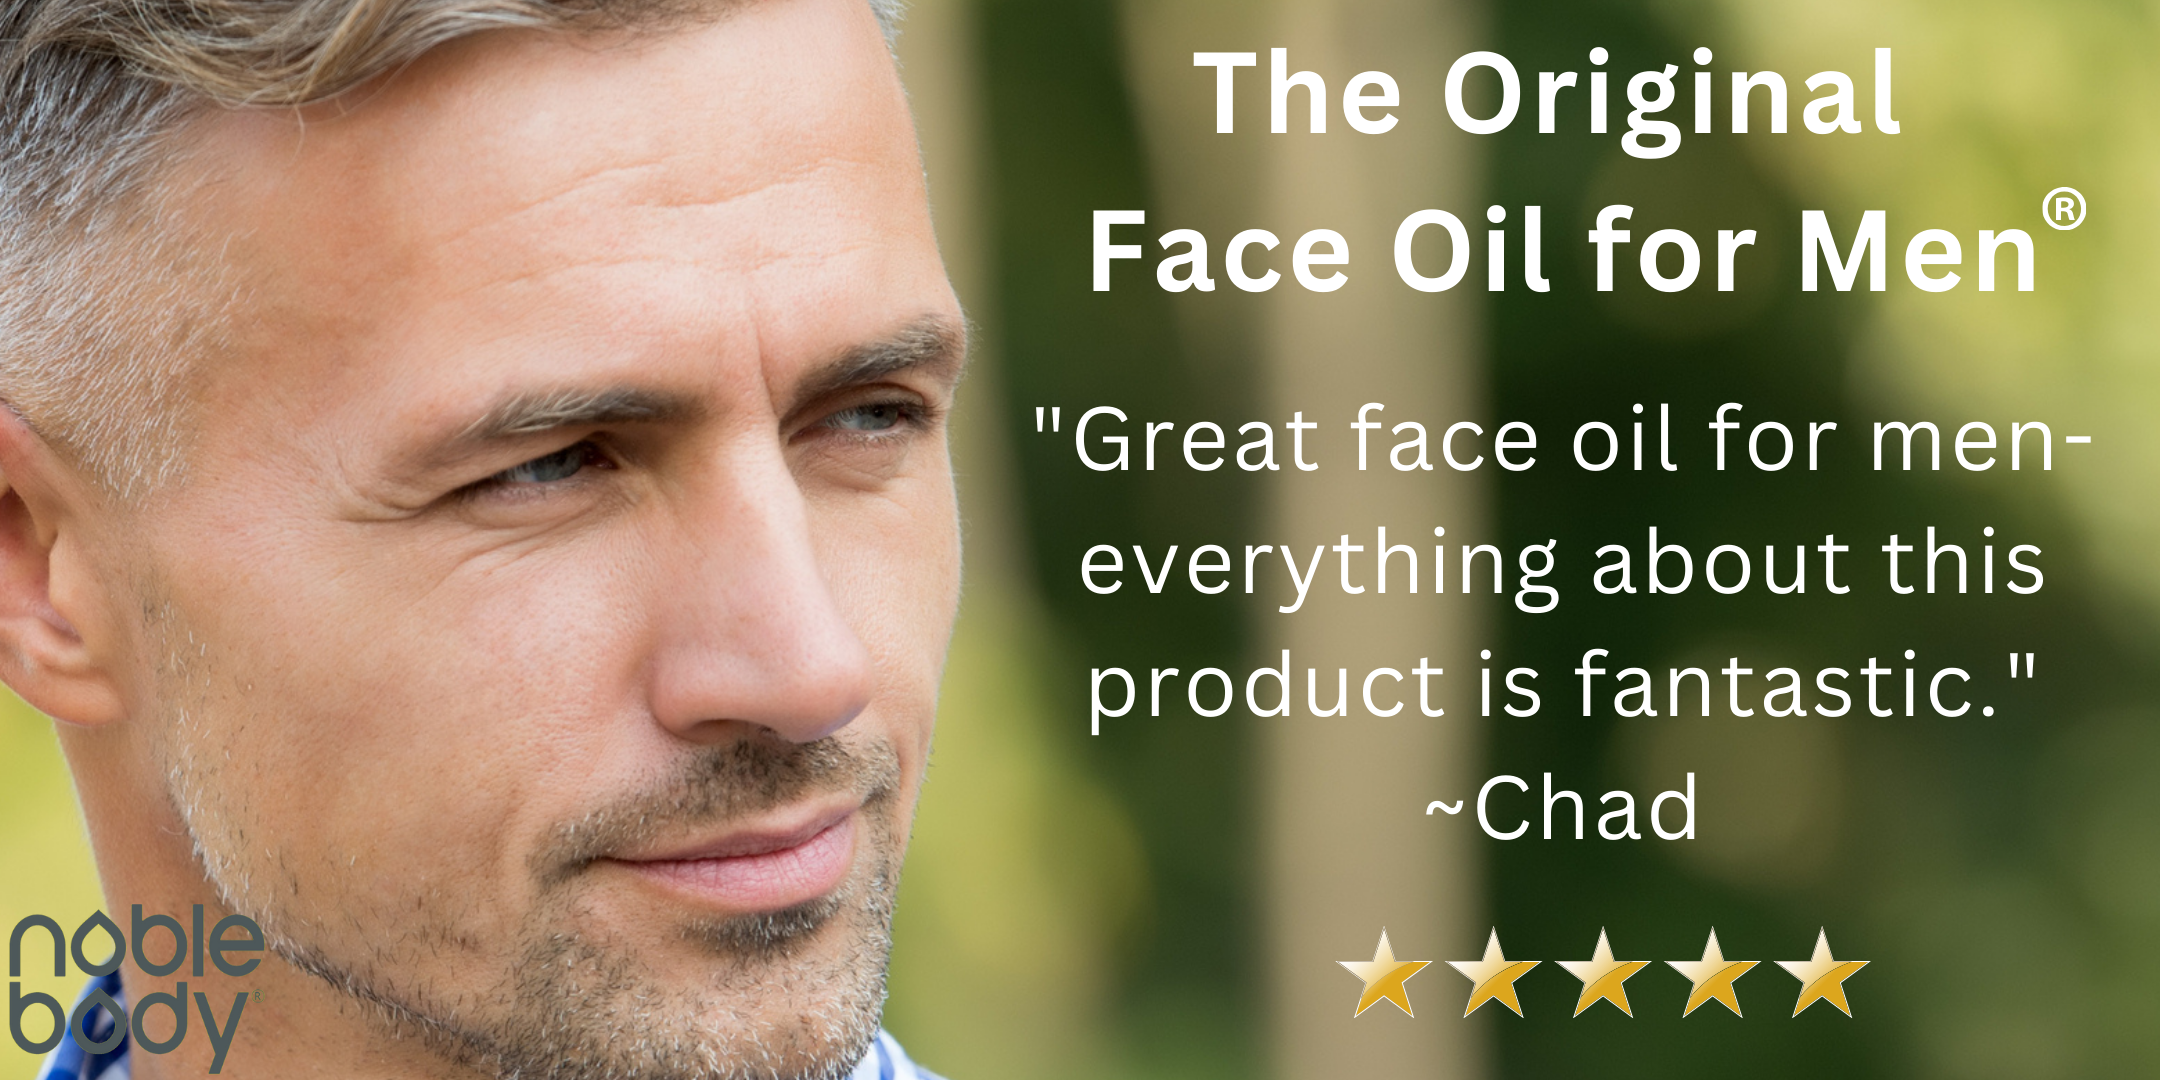 Closeup of handsome older gentleman on left side of picture looking to his left on a green, natural background. Text reads "the original face oil for men" along with a customer review stating "Great face oil for men- everything about this product is fantastic. Chad."